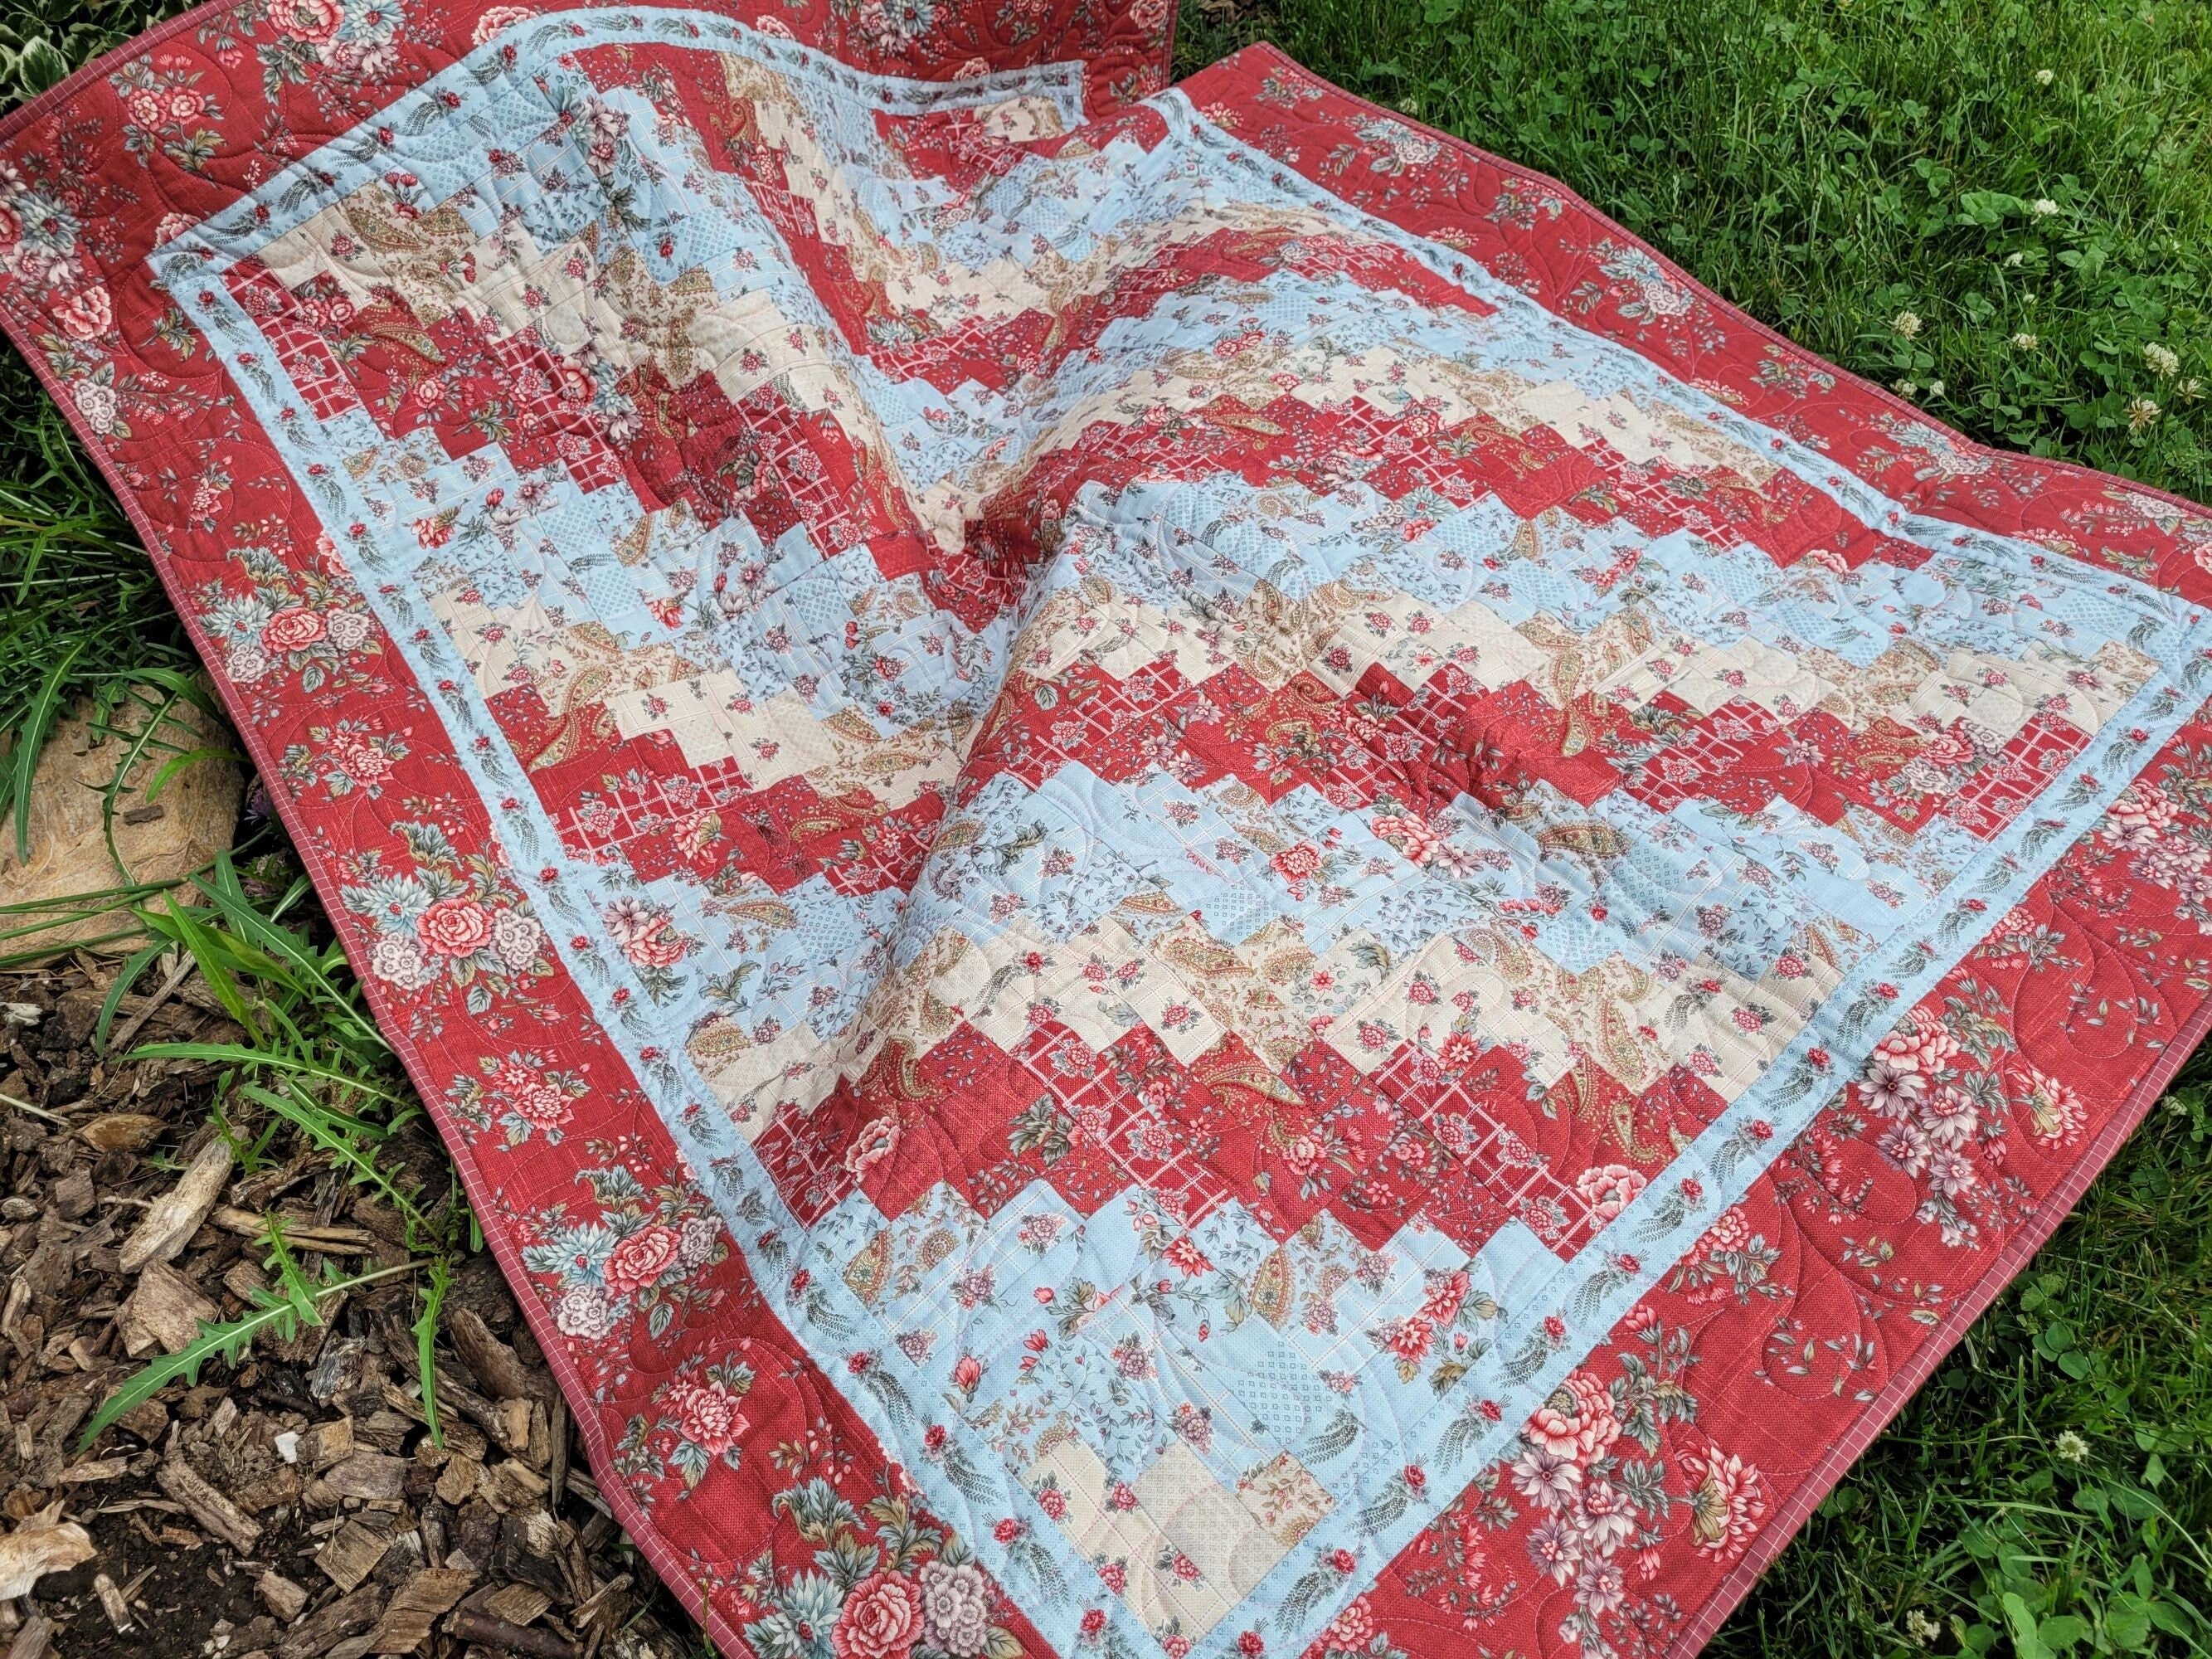 Rose Pink Patchwork Lap Quilt | Floral Throw Quilt | Log Cabin Quilt | Gift for Grandma